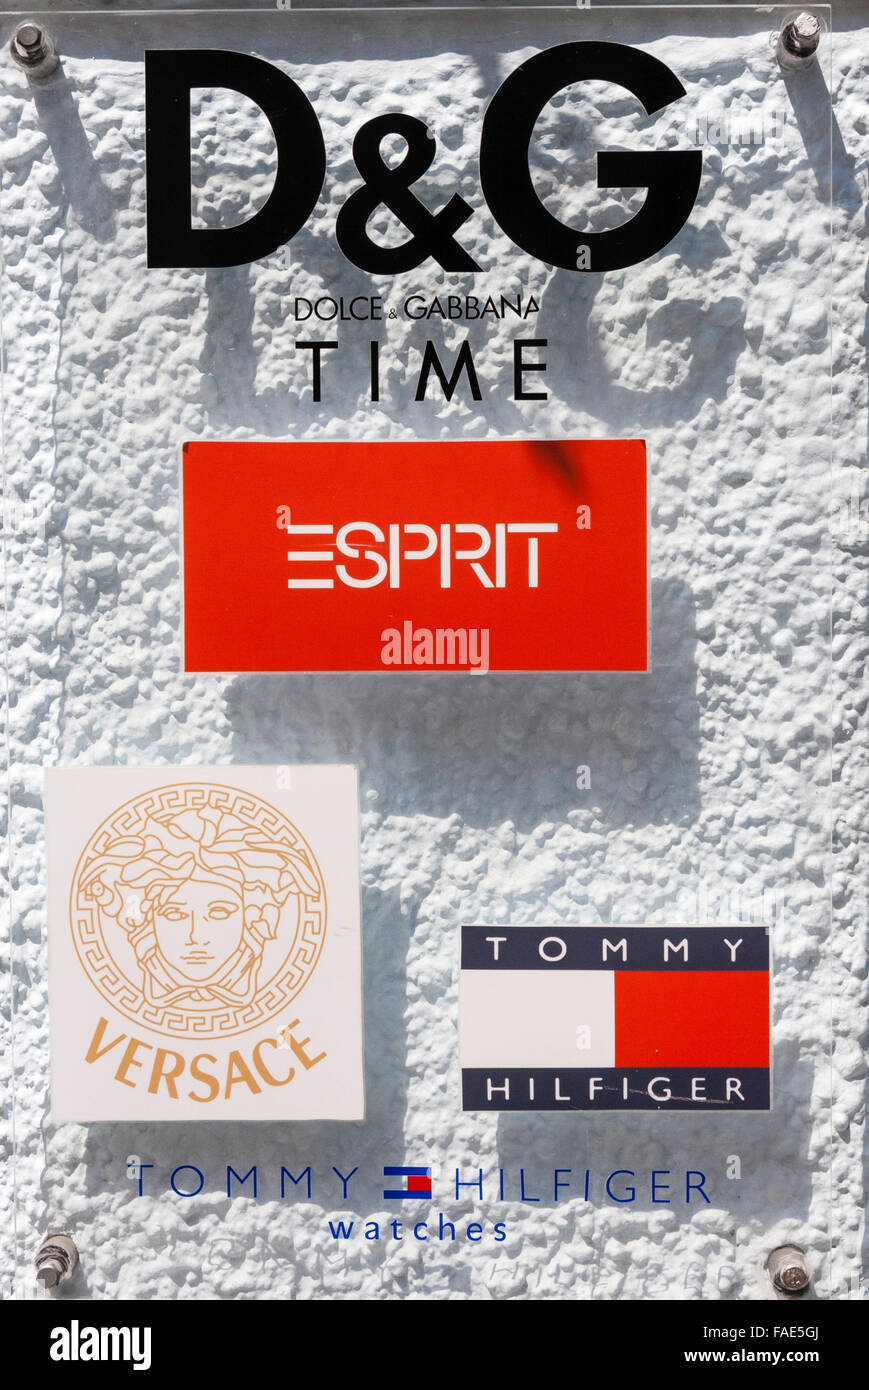 Greece. Plastic transparent sign with various band logs D&G, Versace and "Tommy Hilfiger". Background whitewashed textured wall Stock Photo -